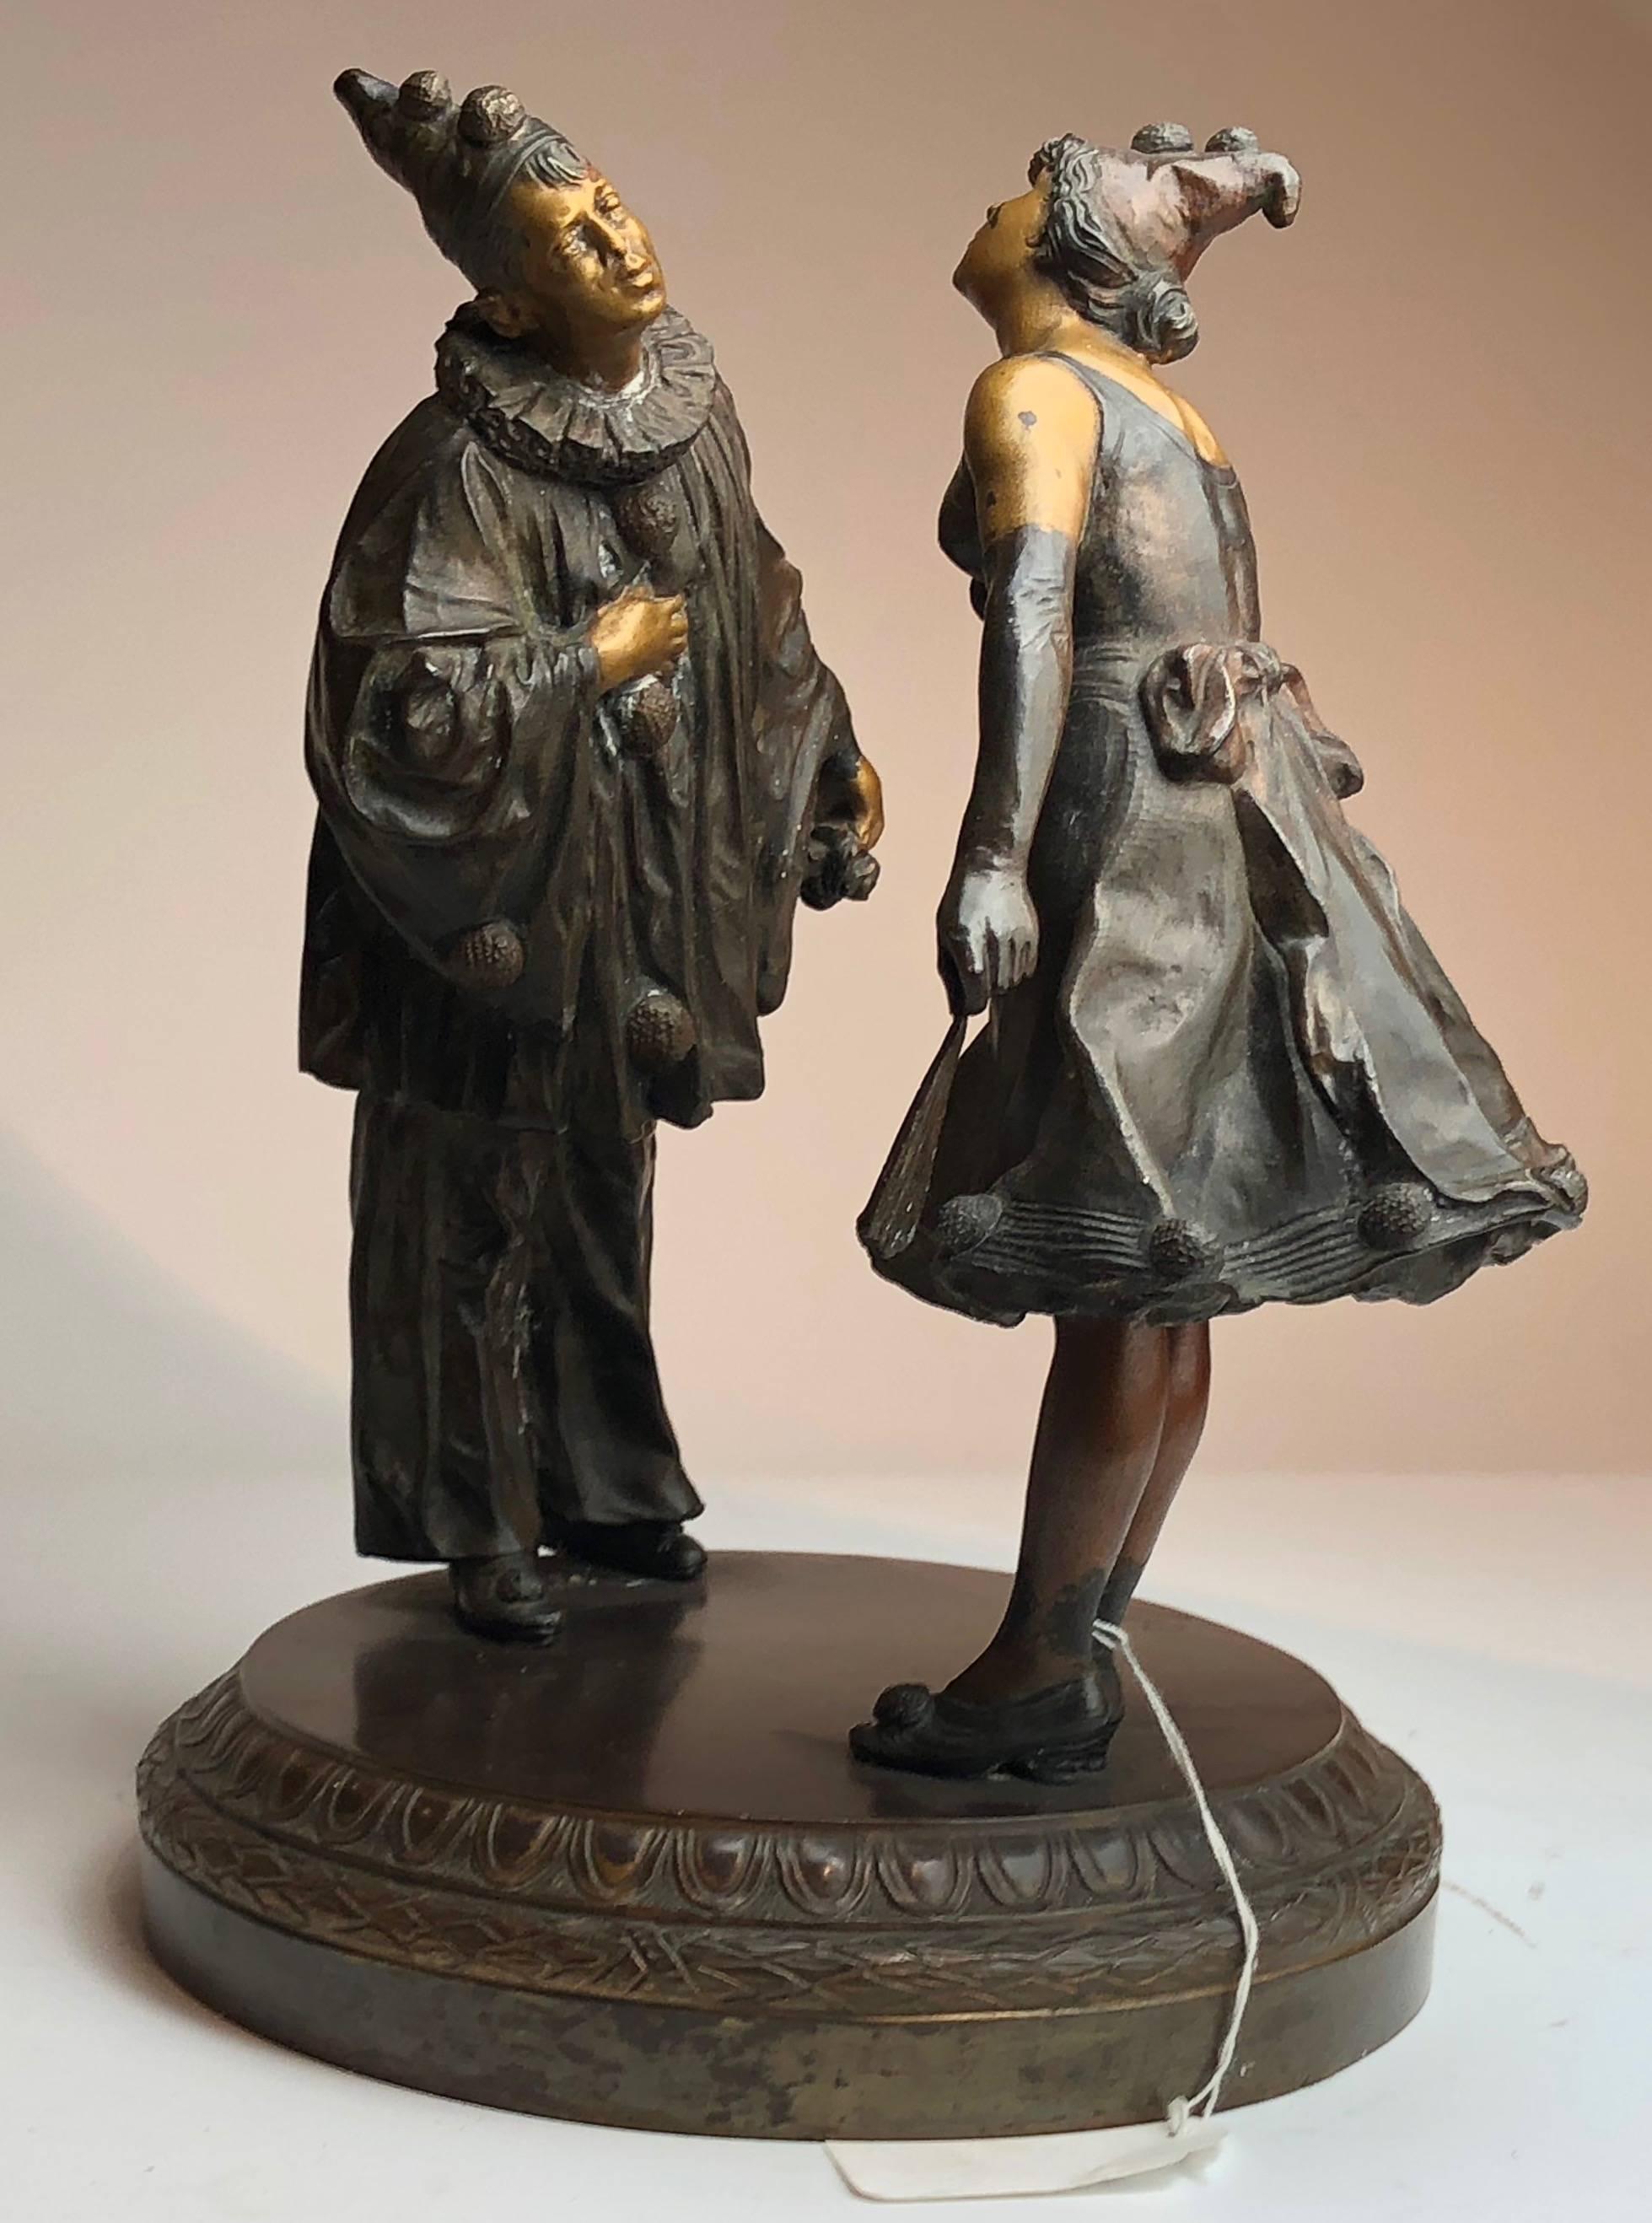 A 19th century Austrian coloured bronze group of pierot the clown and lady about to kiss each on the cheek
Signed Ehleder

Austrian circa 1890
height 28.5 cm